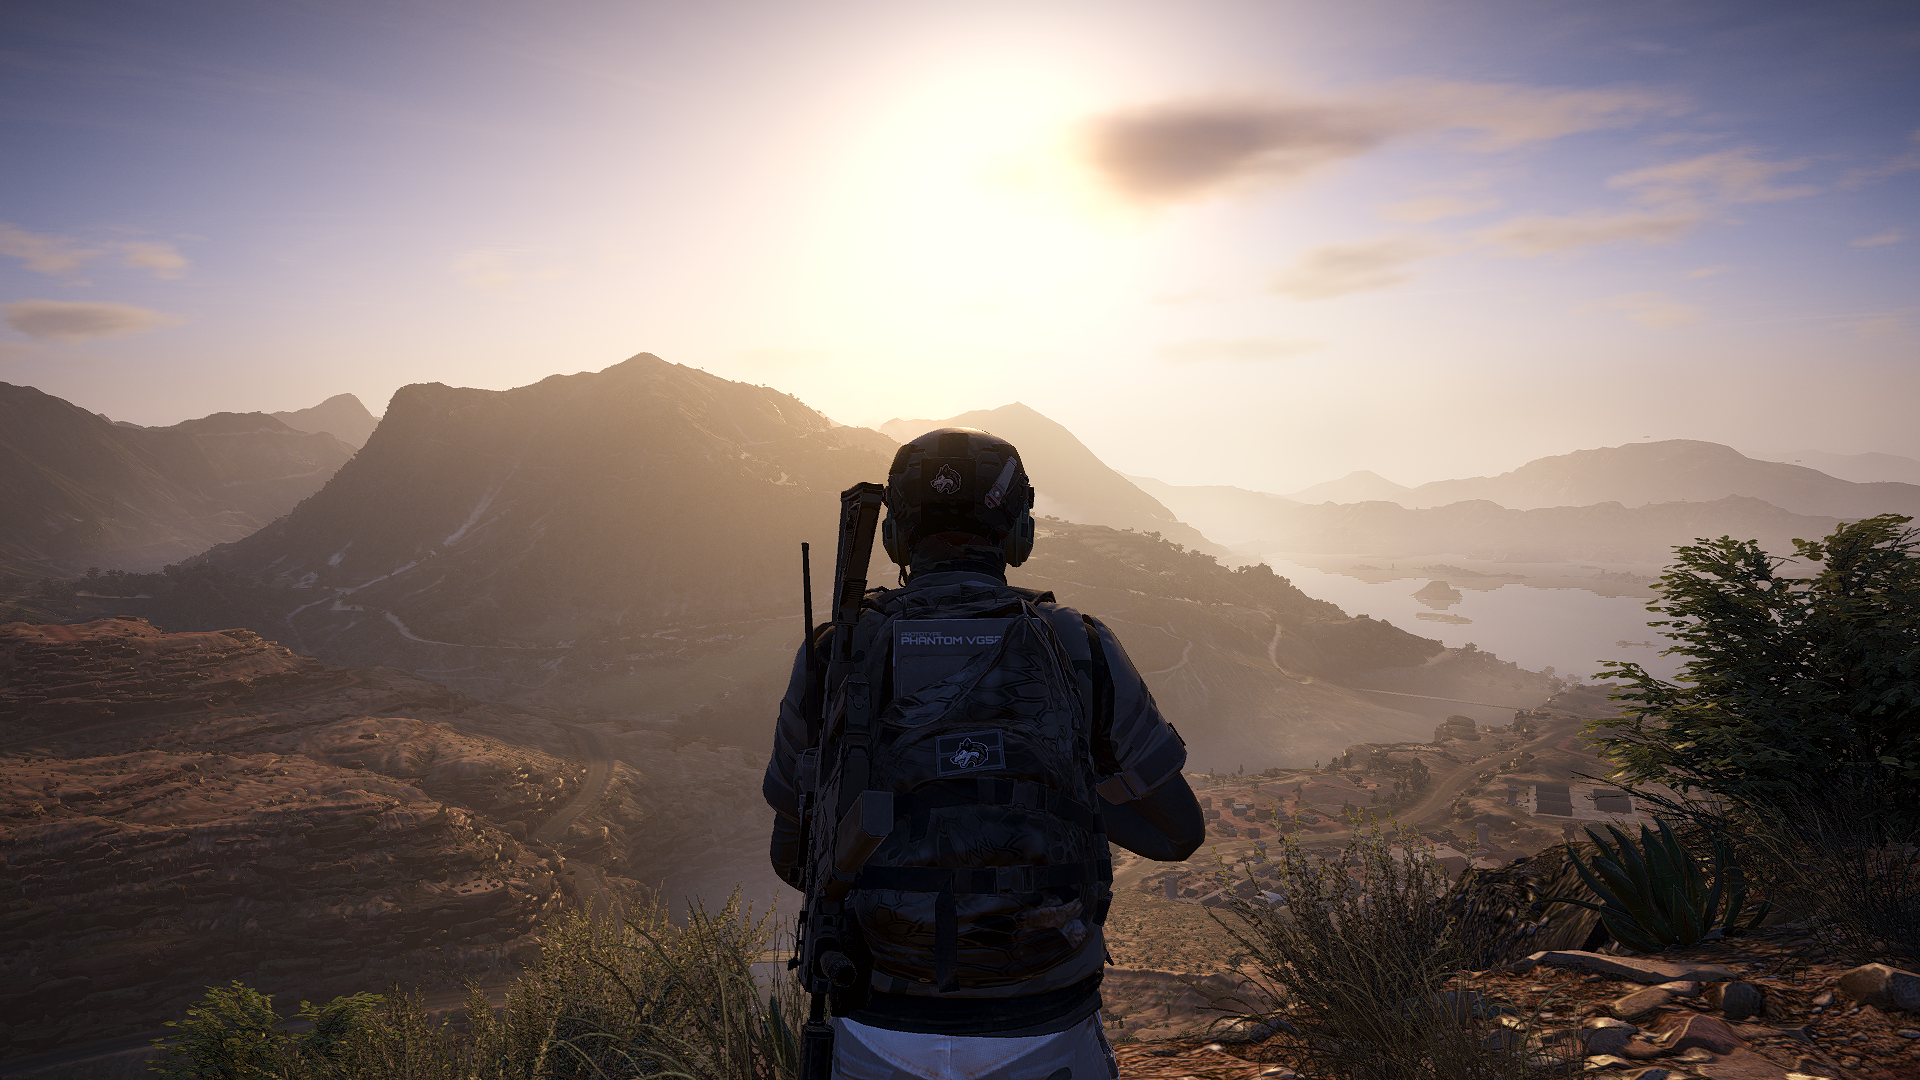 Tom Clancys Ghost Recon Wildlands Video Games PC Gaming Screen Shot Ghost Recon 1920x1080